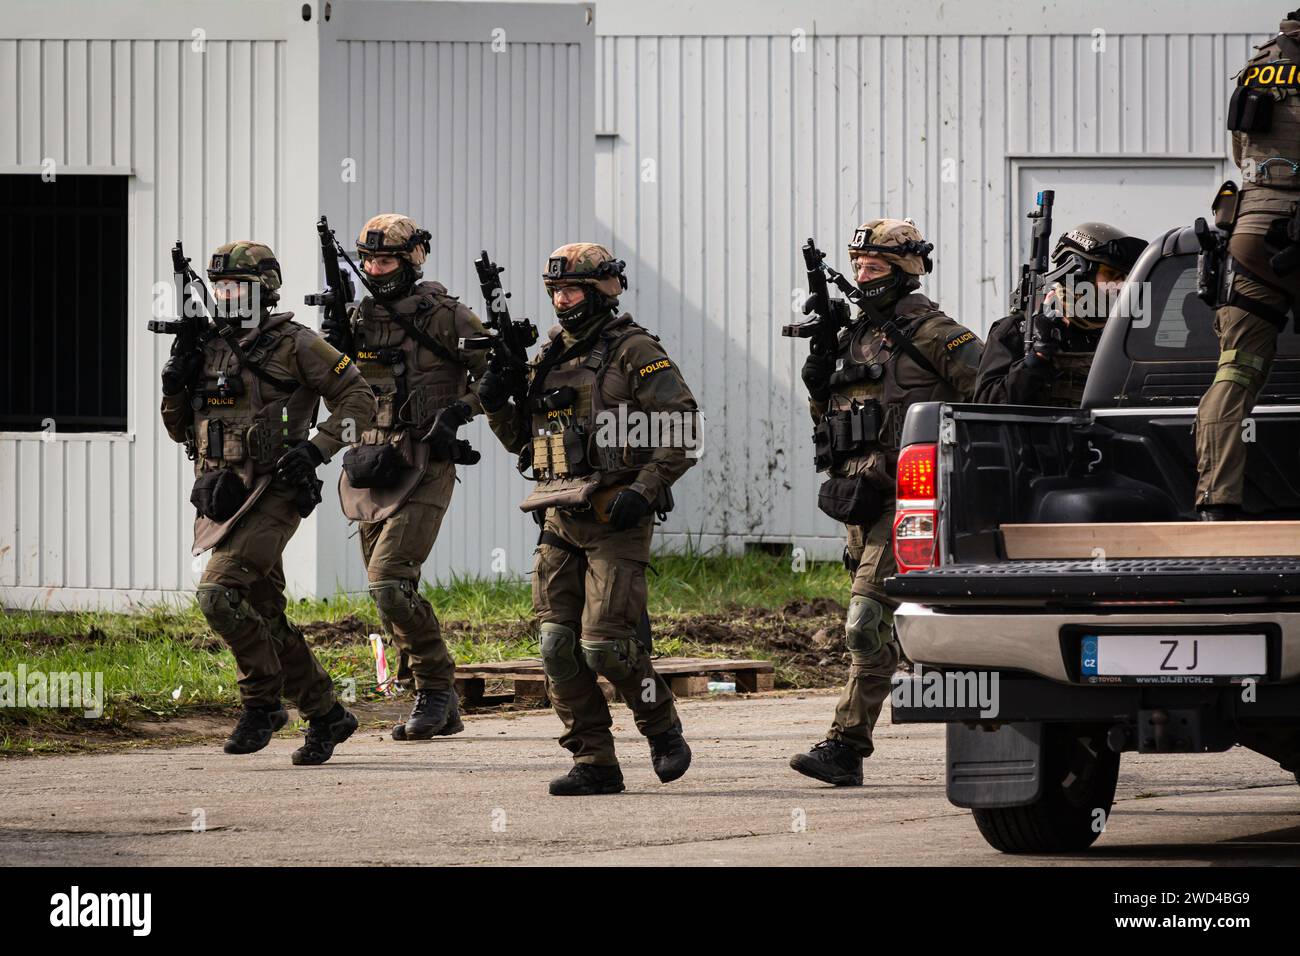 Special forces tactical police operators from the Czech Republic in a hostage negotiation rehearsal at NATO days airshow. Stock Photo